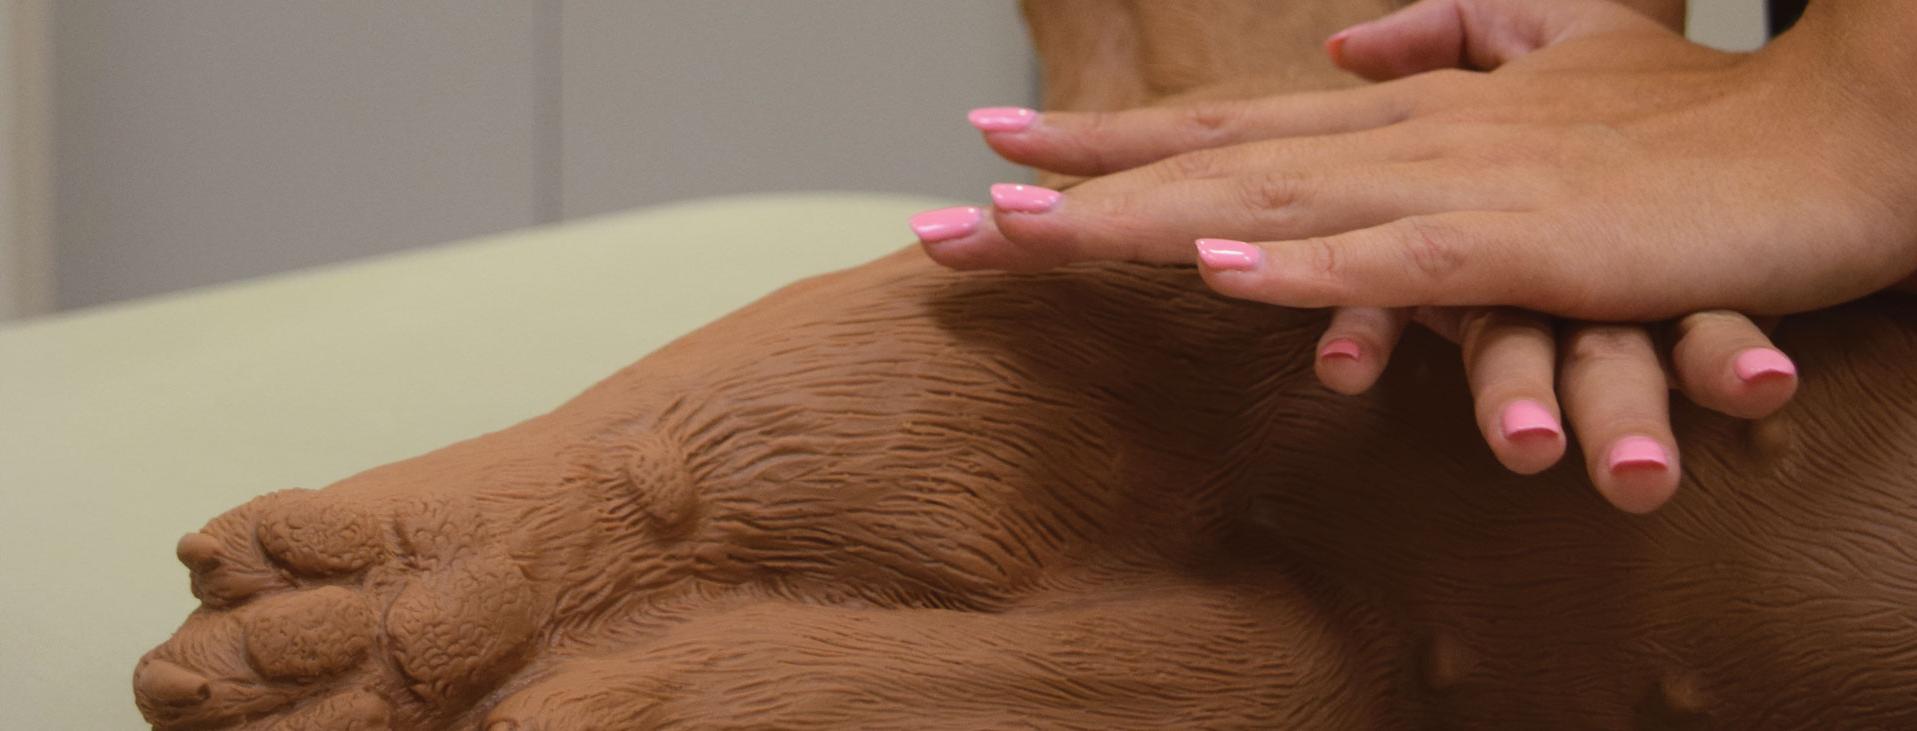 woman's hands with pink nail polish performing CPR compressions on fake brown dog